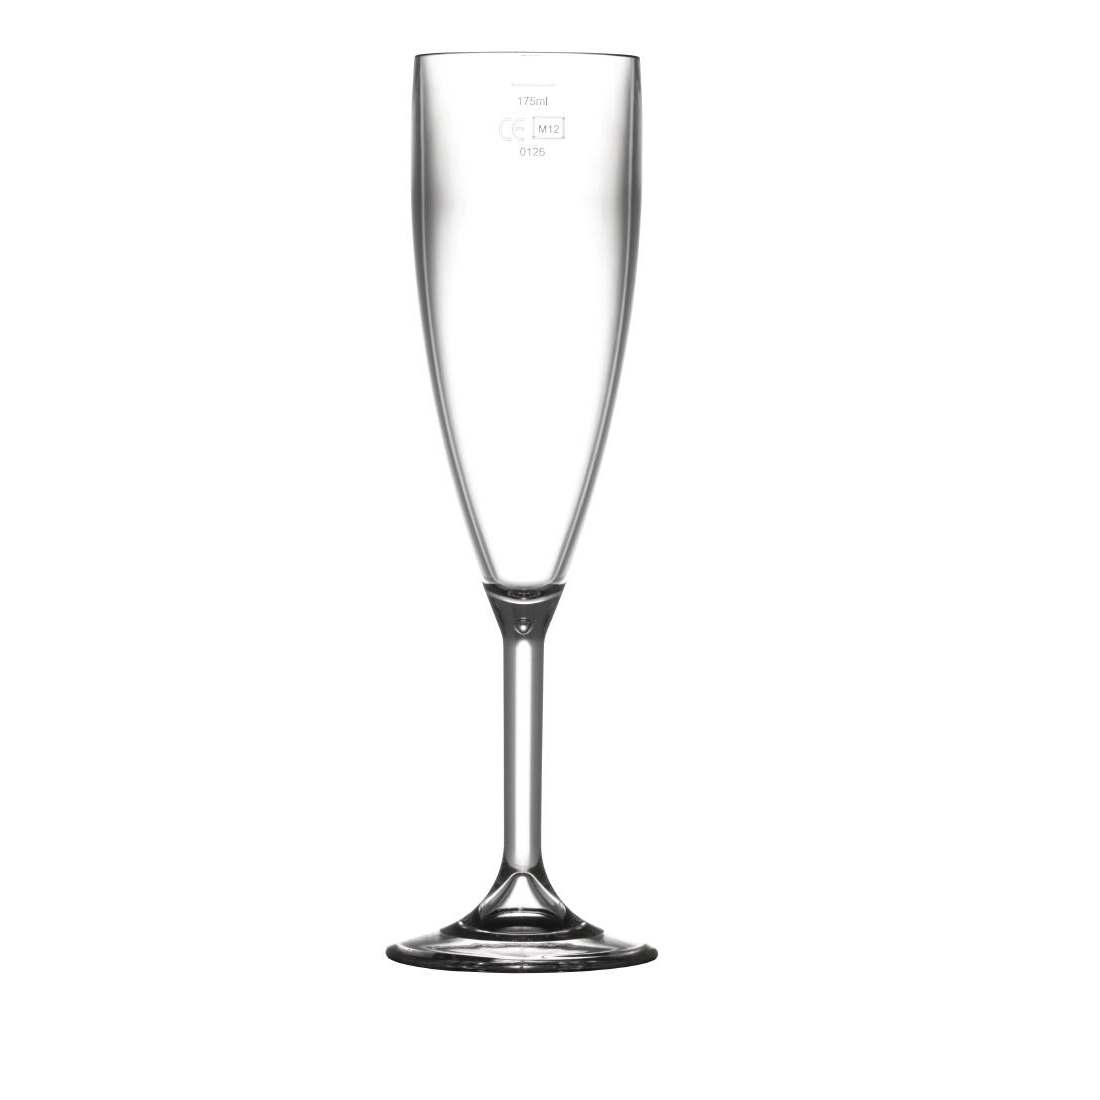 BBP Polycarbonate Champagne Flutes 200ml CE Marked at 175ml